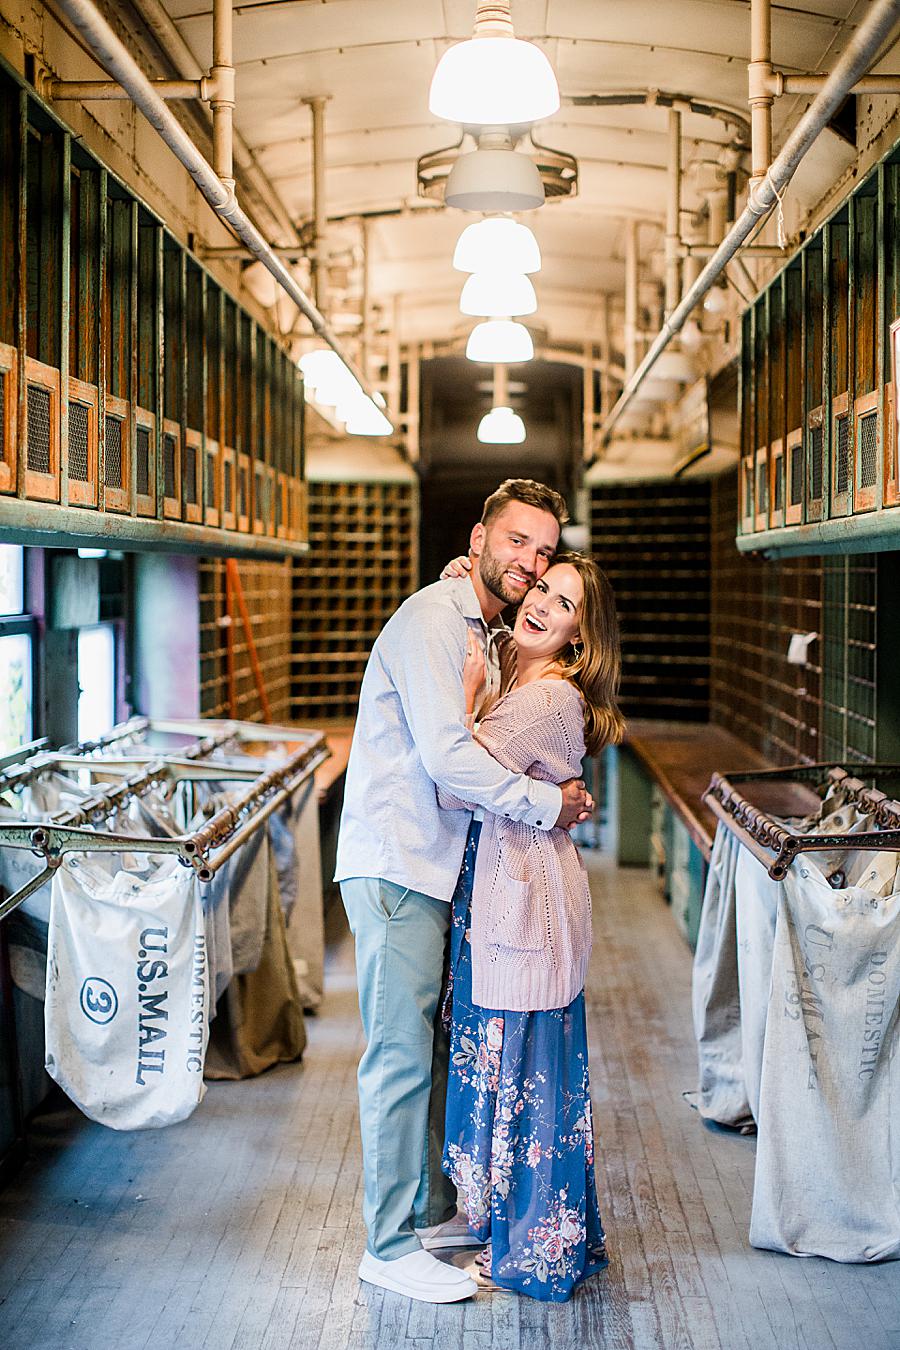 Cheeks together at this Southern Railway Station Engagement by Knoxville Wedding Photographer, Amanda May Photos.